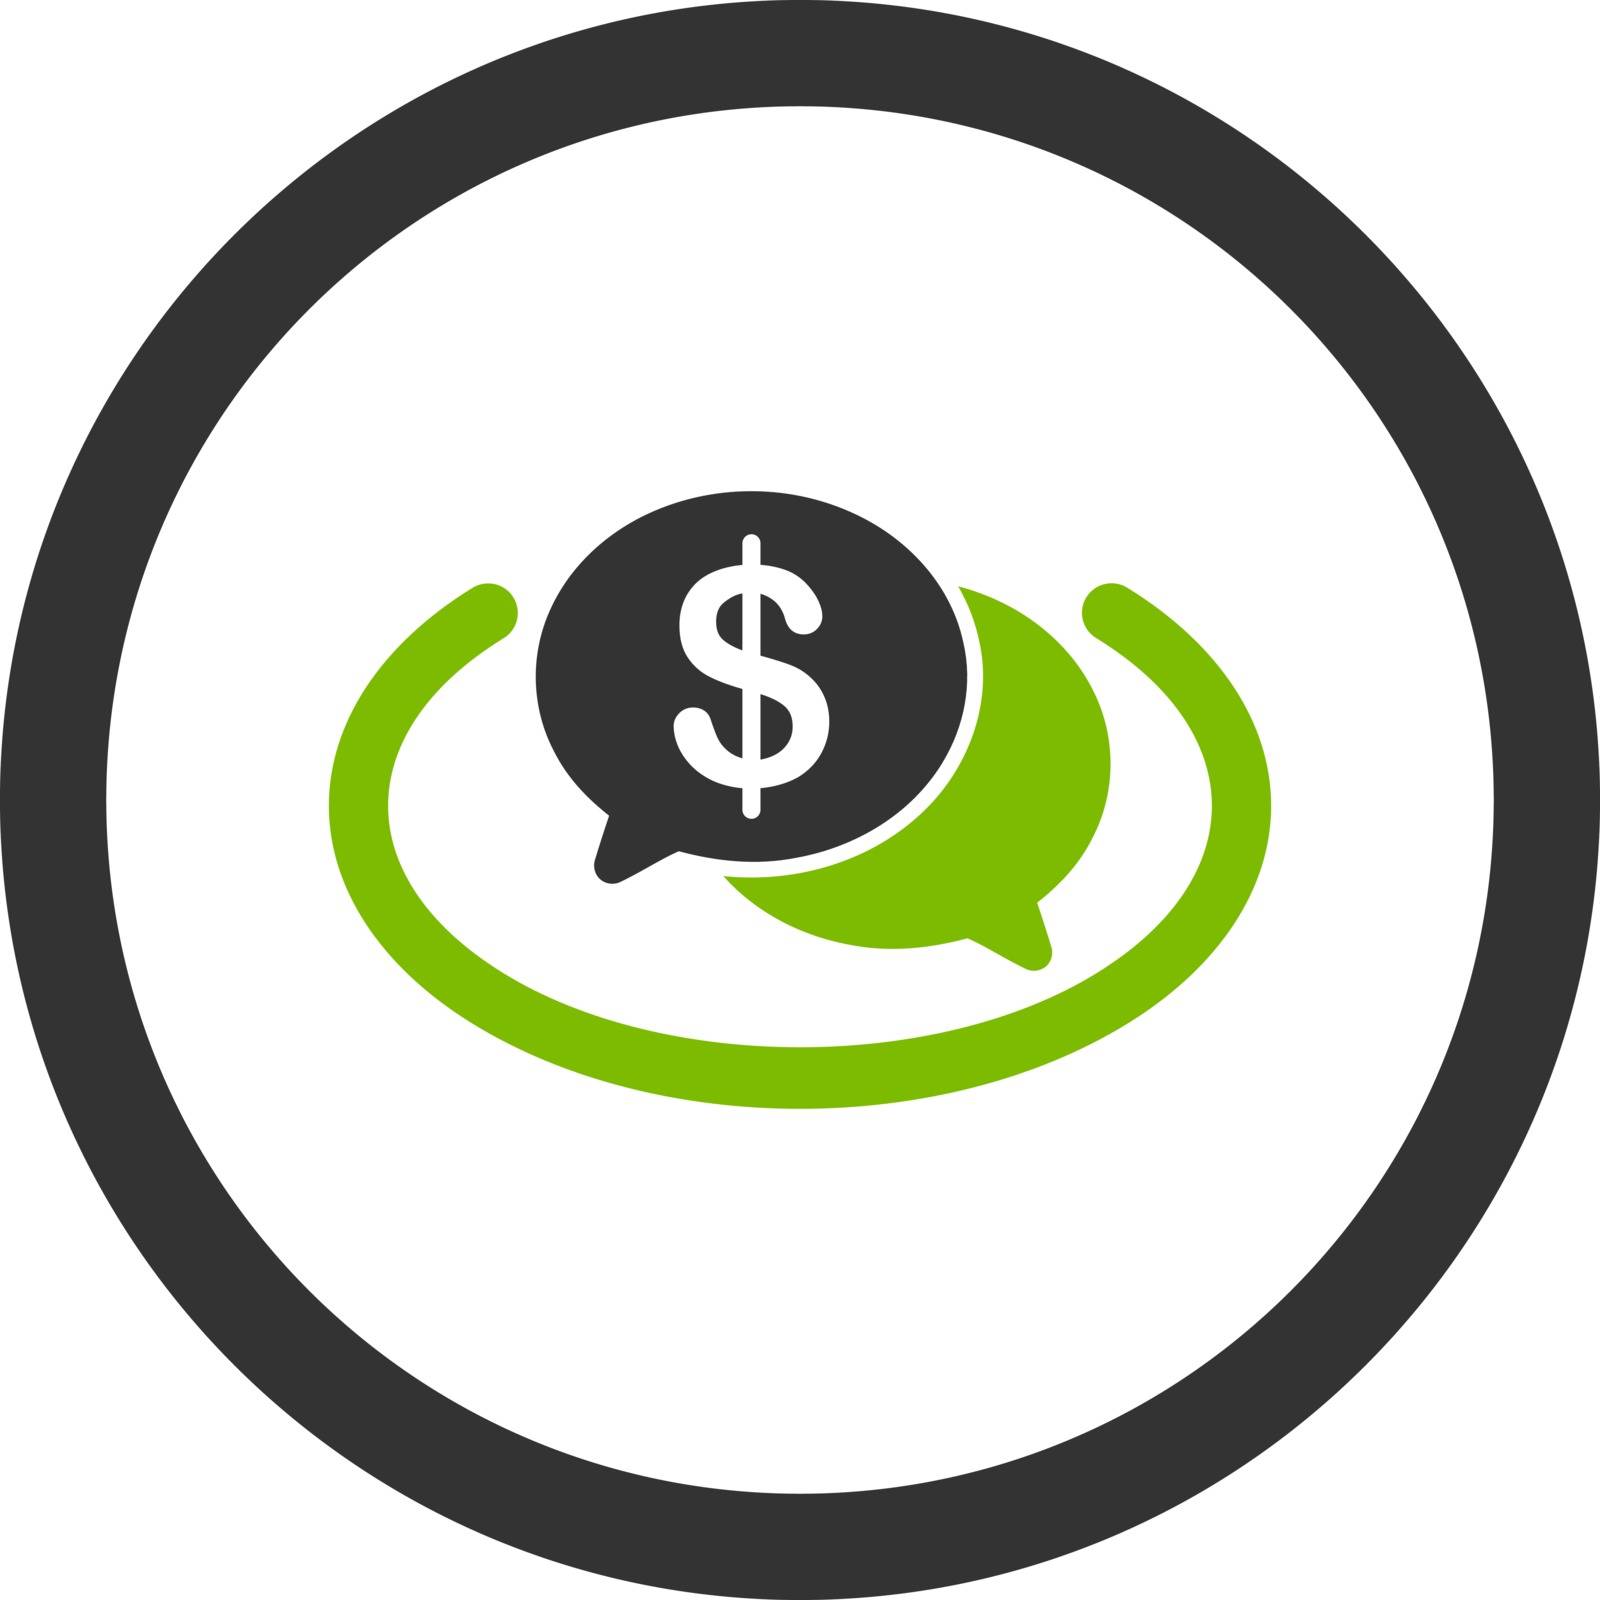 Financial Network vector icon. This flat rounded symbol uses eco green and gray colors and isolated on a white background.